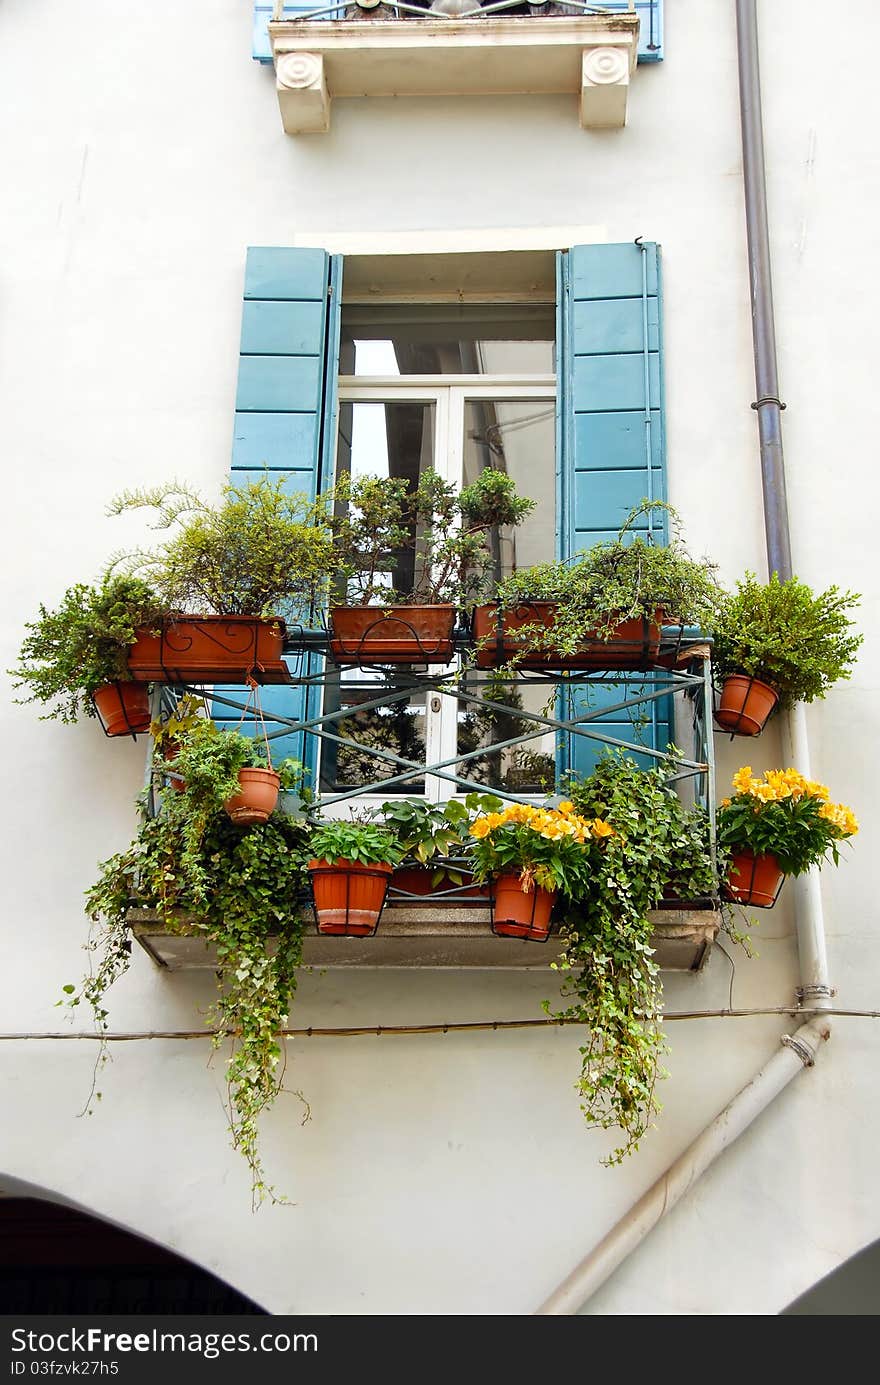 Terrace and window of building in Italy, Padova, with flowerpots and blooming flowers. Terrace and window of building in Italy, Padova, with flowerpots and blooming flowers